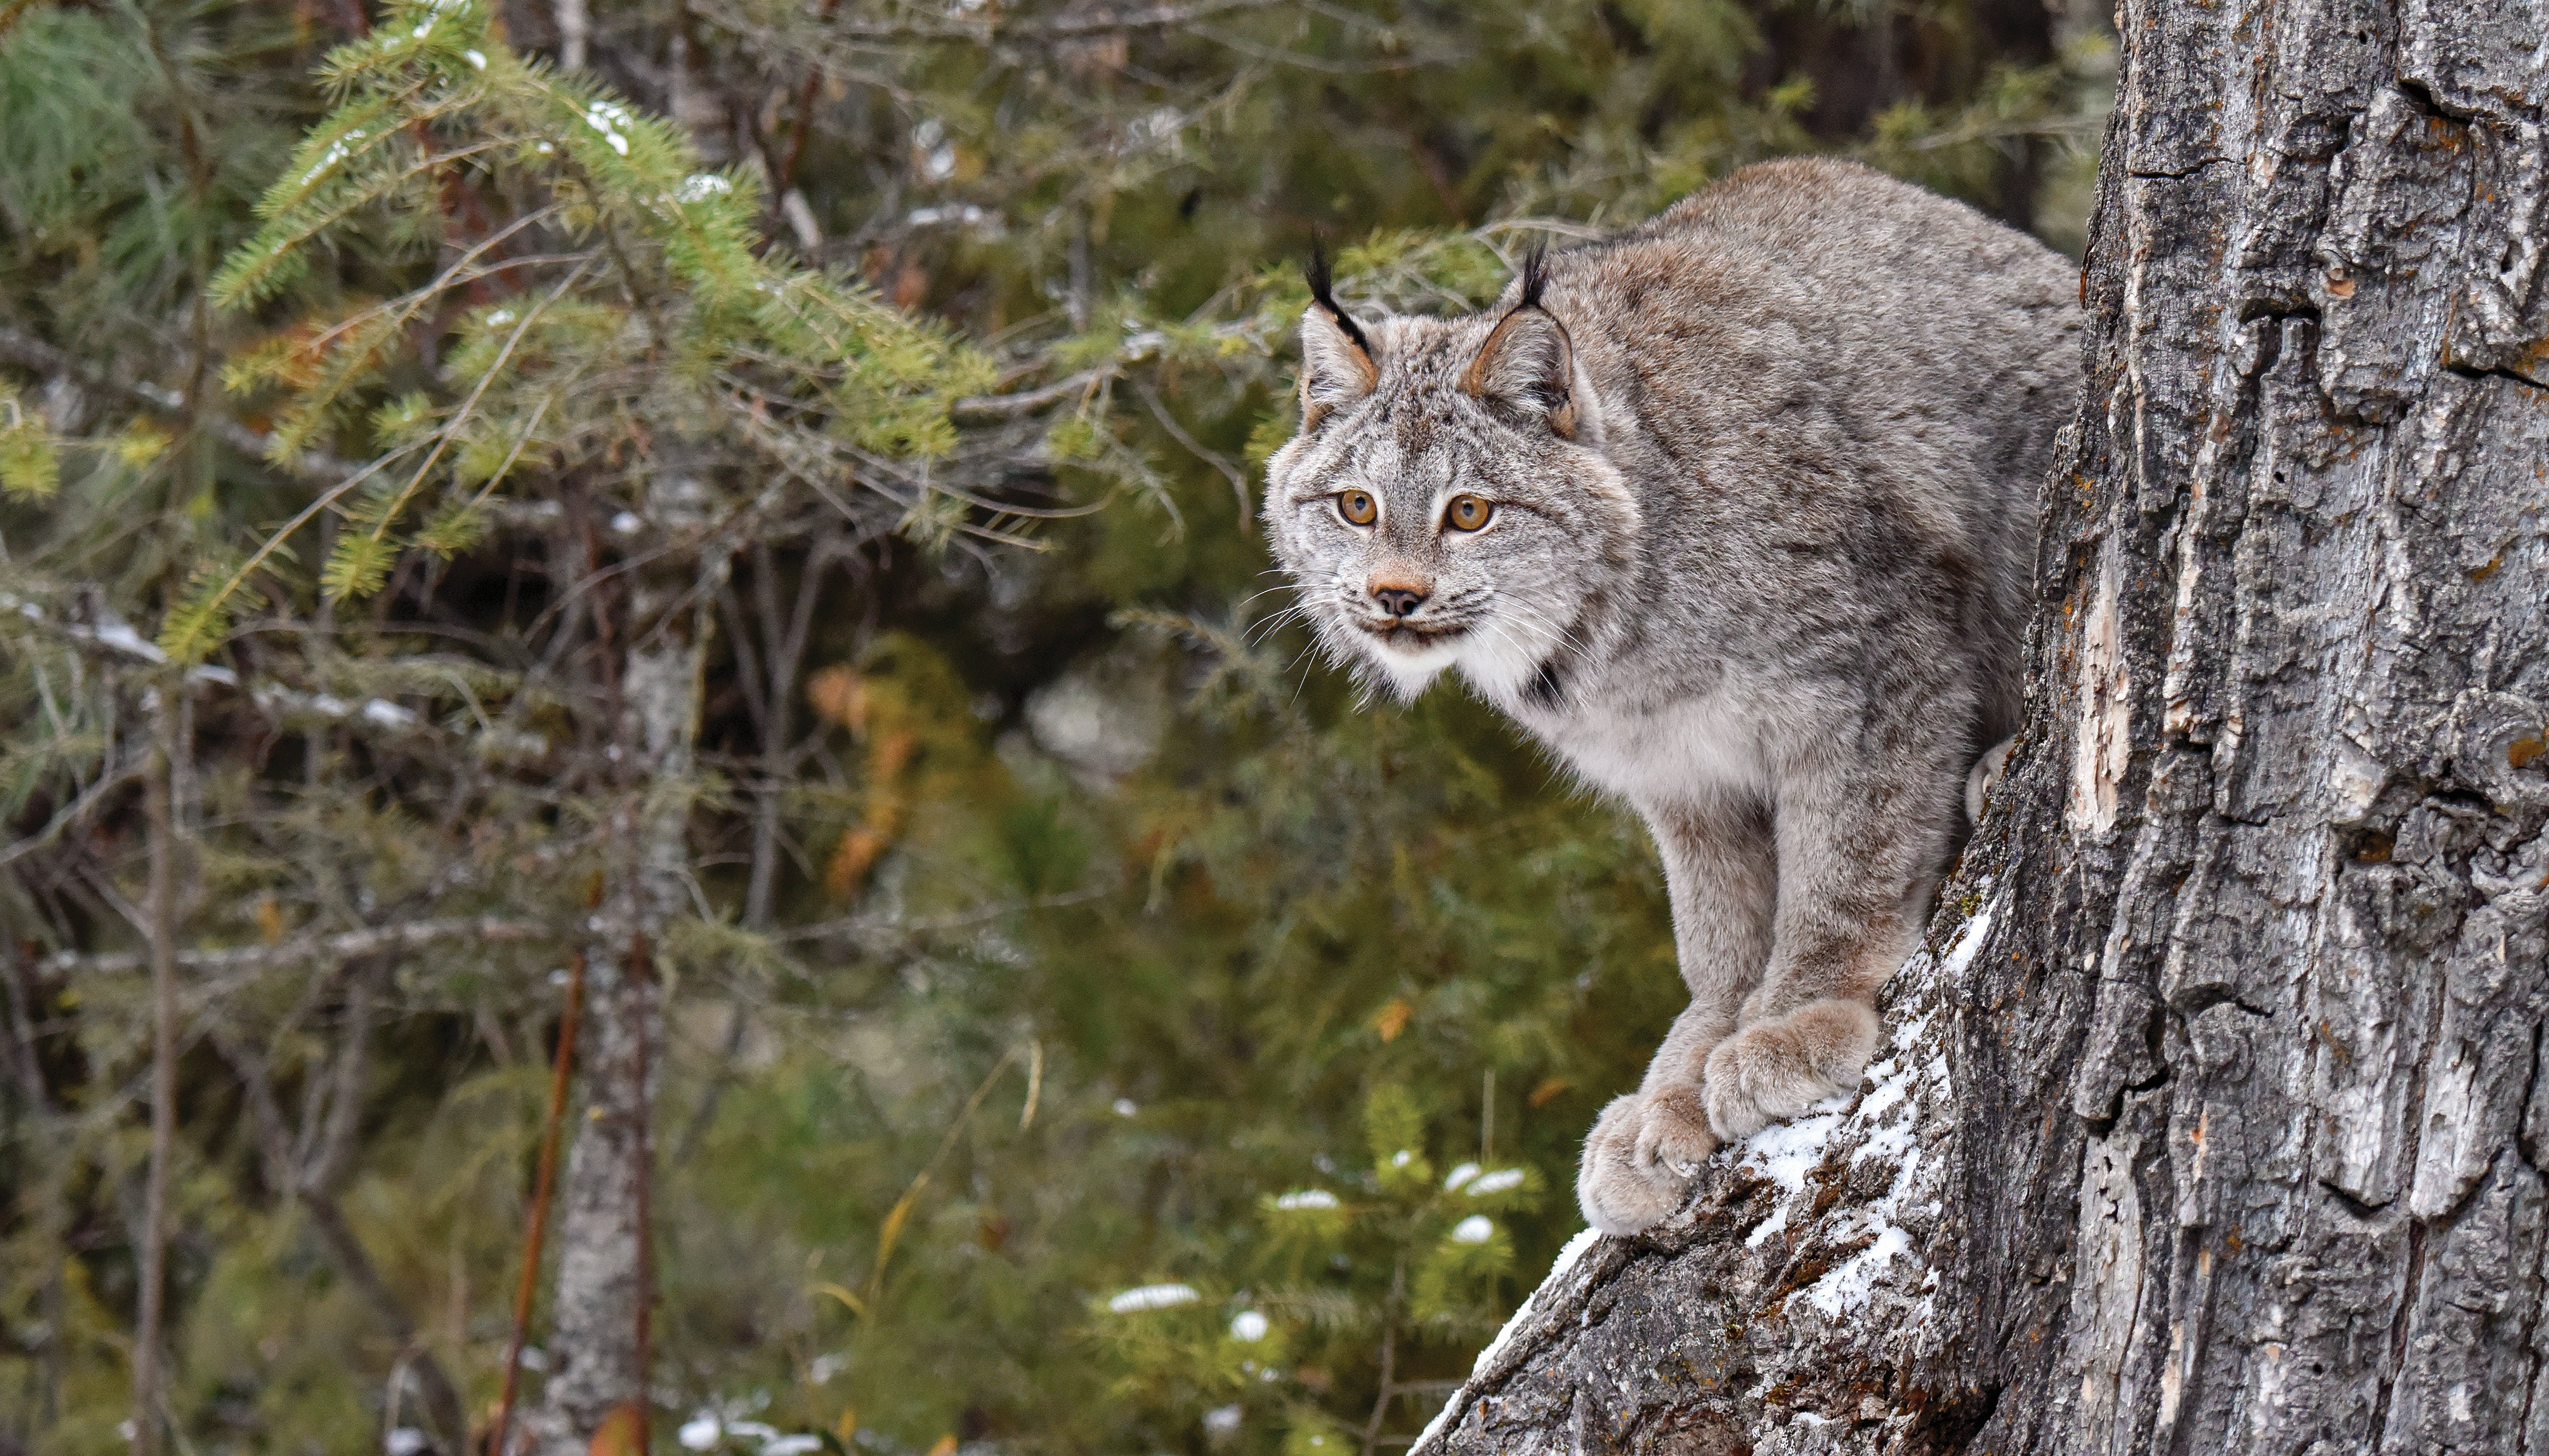 Read SUPPORT RECOVERING AMERICA’S WILDLIFE ACT by KIRSTEN PISTO